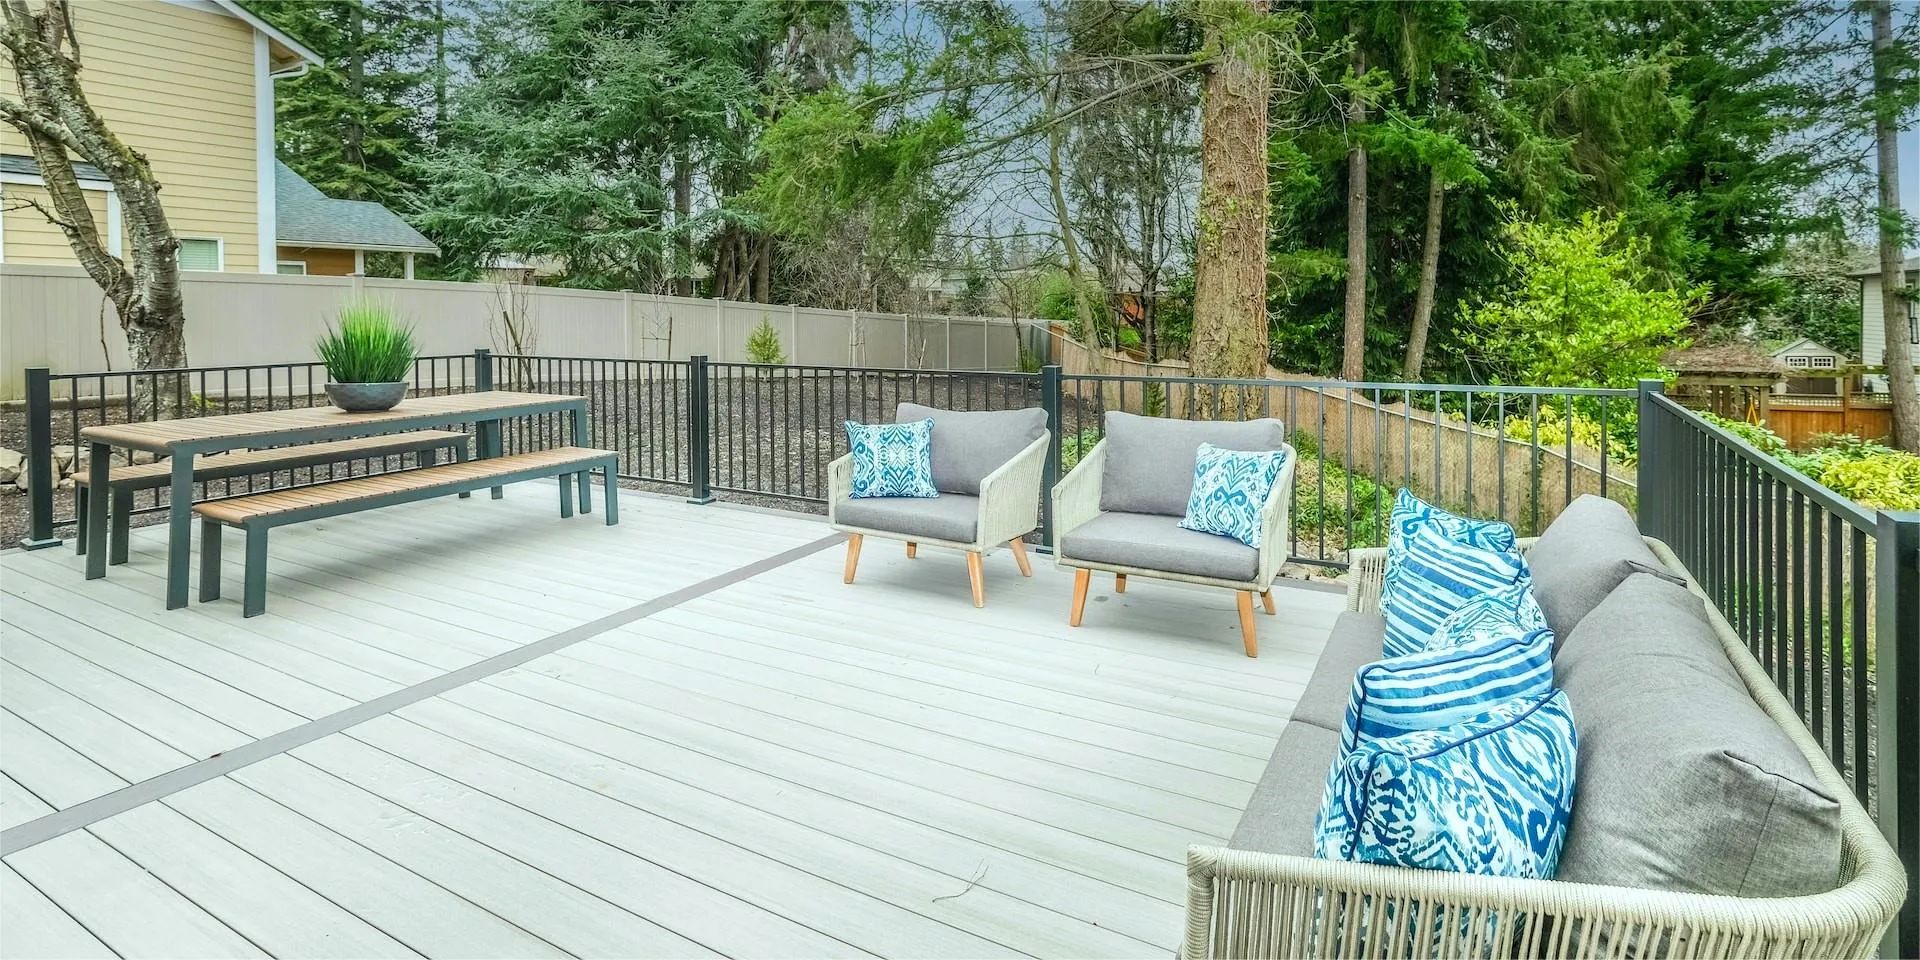 Protecting Your Deck from Outdoor Furniture